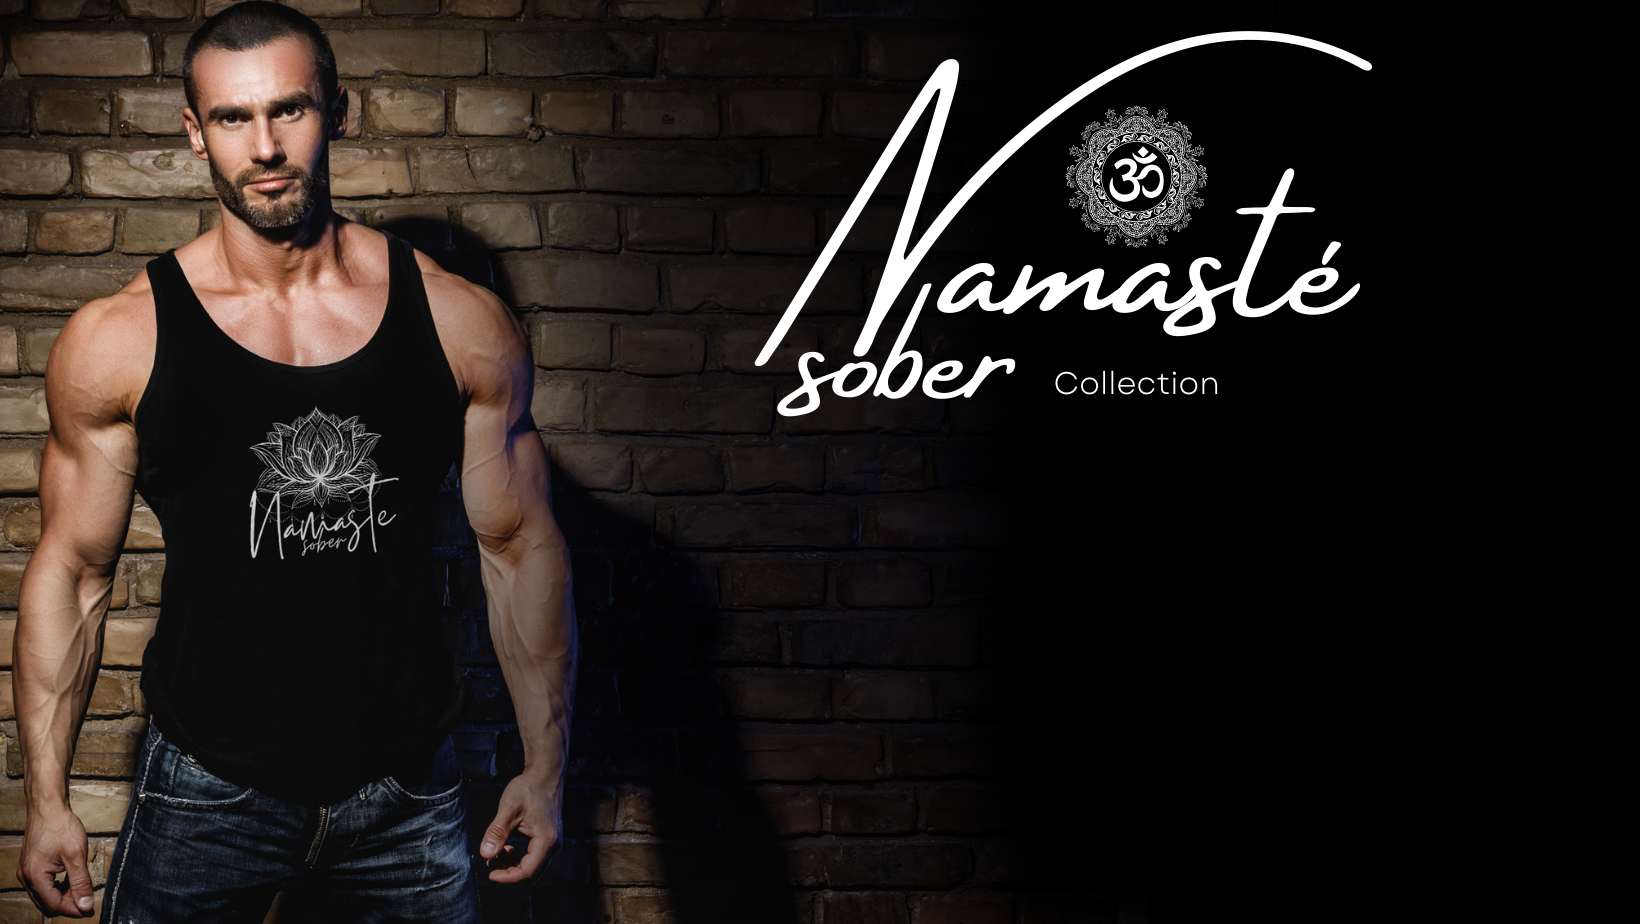 Unleash your inner tranquility and celebrate your sober journey with the Namaste Sober collection. These captivating graphic shirts unite the principles of mindfulness, sobriety, and LGBTQ advocacy. Whether you're practicing yoga, meditating, or embracing a sober lifestyle, these shirts serve as a symbol of self-care, recovery, and support for the LGBTQ community. Step into a state of balance and serenity with these inspiring fashion pieces.